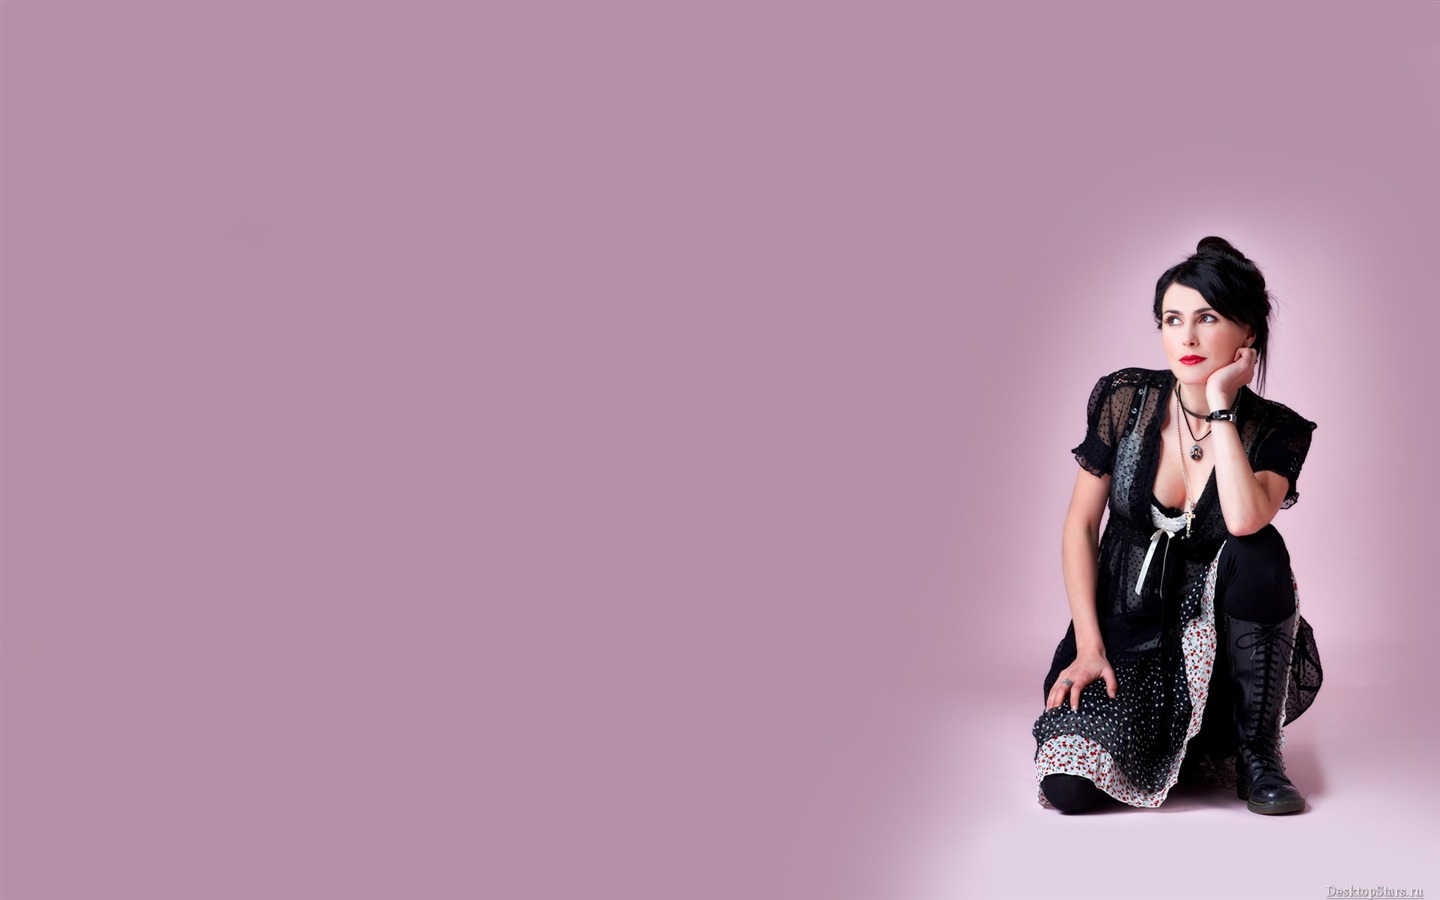 Sharon den Adel #010 - 1440x900 Wallpapers Pictures Photos Images